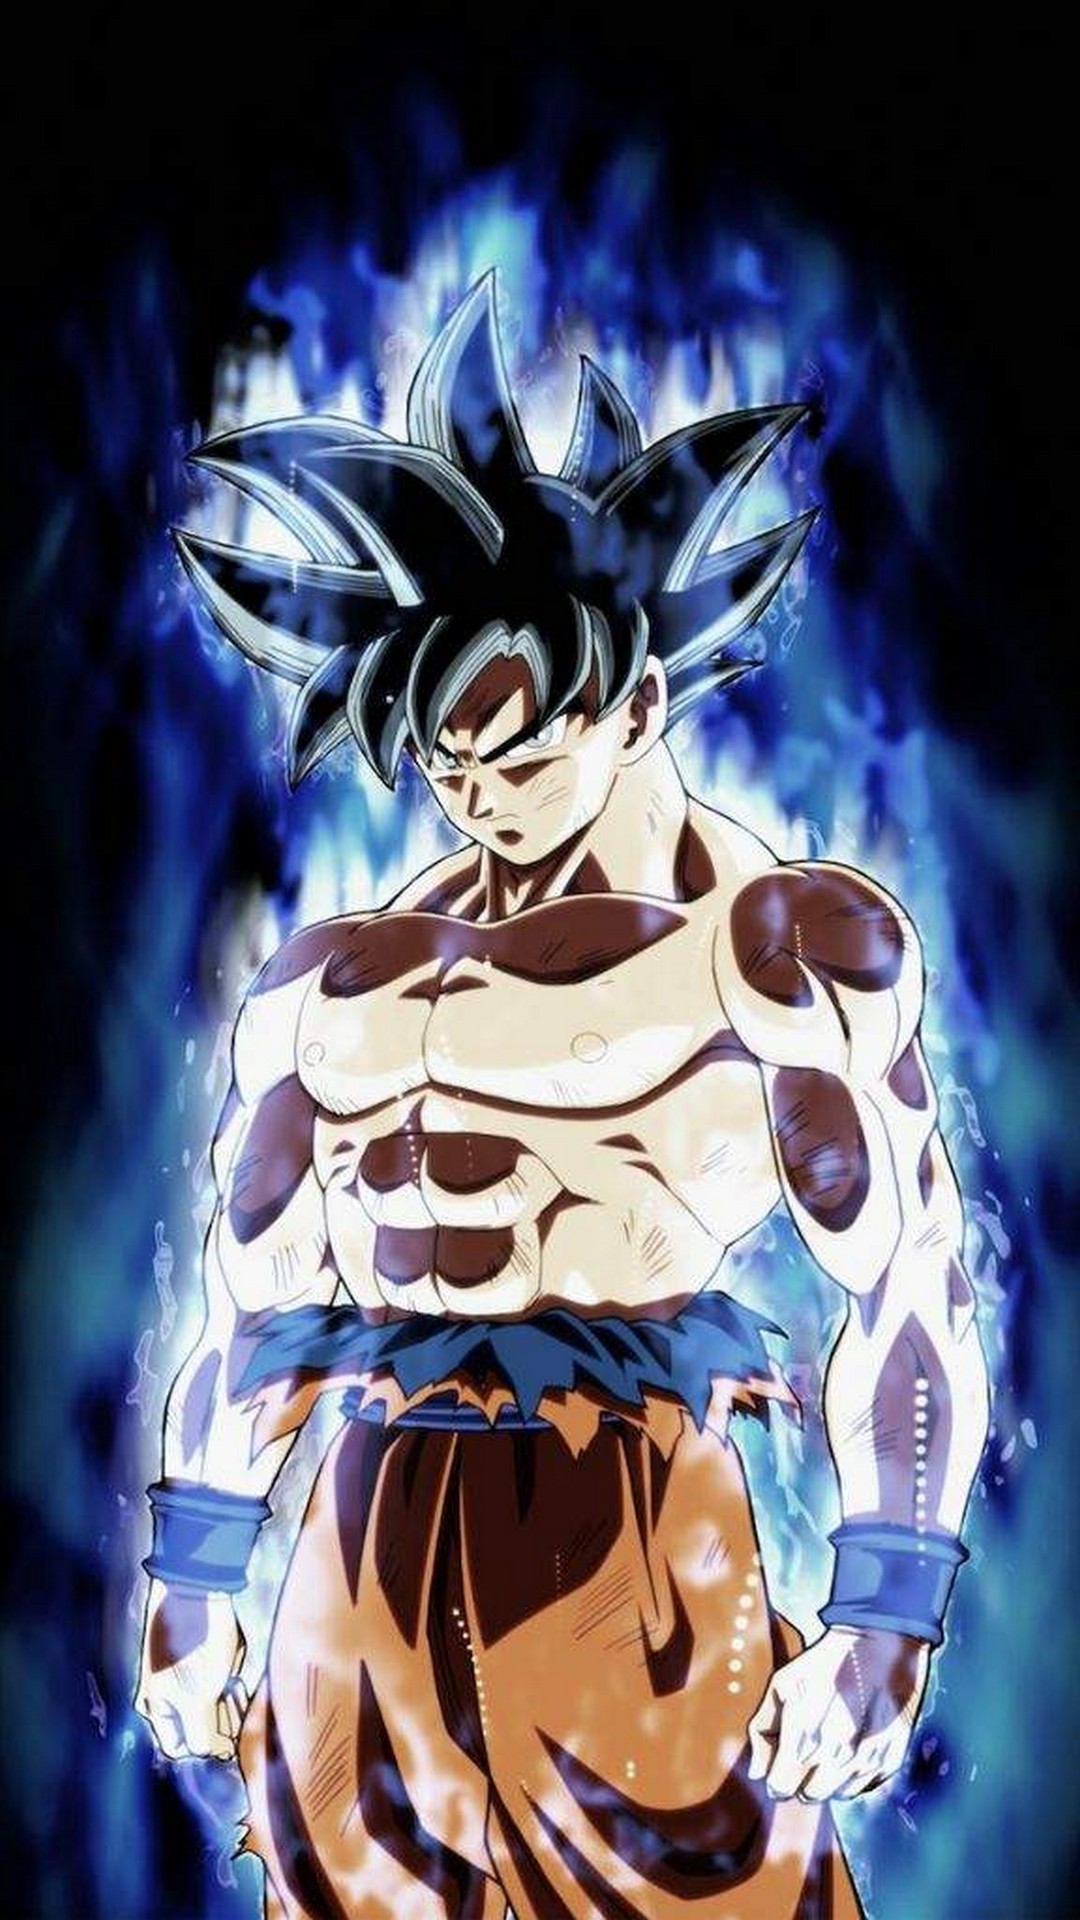 Wallpaper Goku Imagenes iPhone with resolution 1080X1920 pixel. You can make this wallpaper for your iPhone 5, 6, 7, 8, X backgrounds, Mobile Screensaver, or iPad Lock Screen